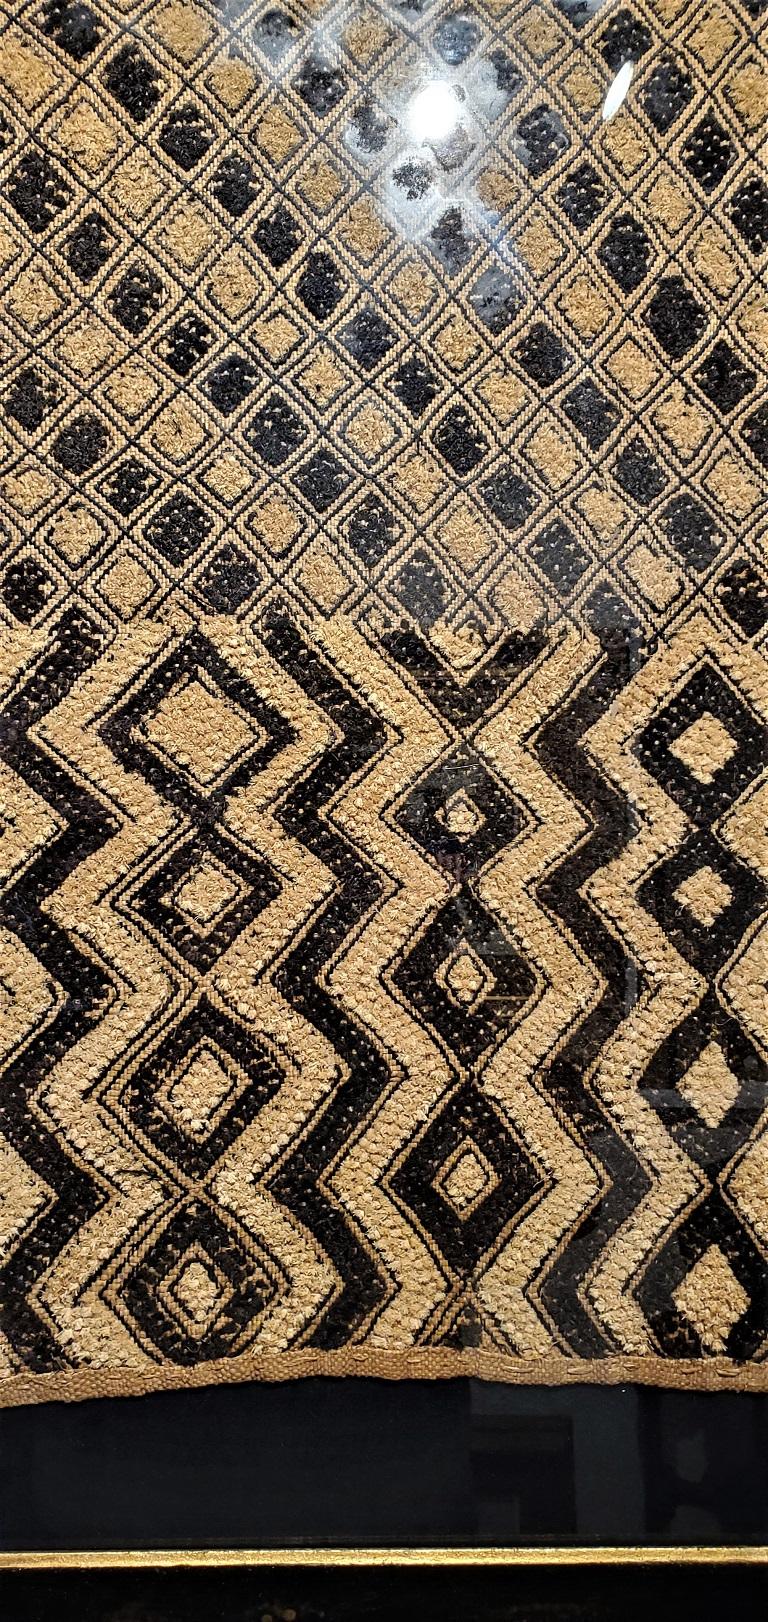 Tribal Early 20th Century Congolese Large Kuba Framed Textile